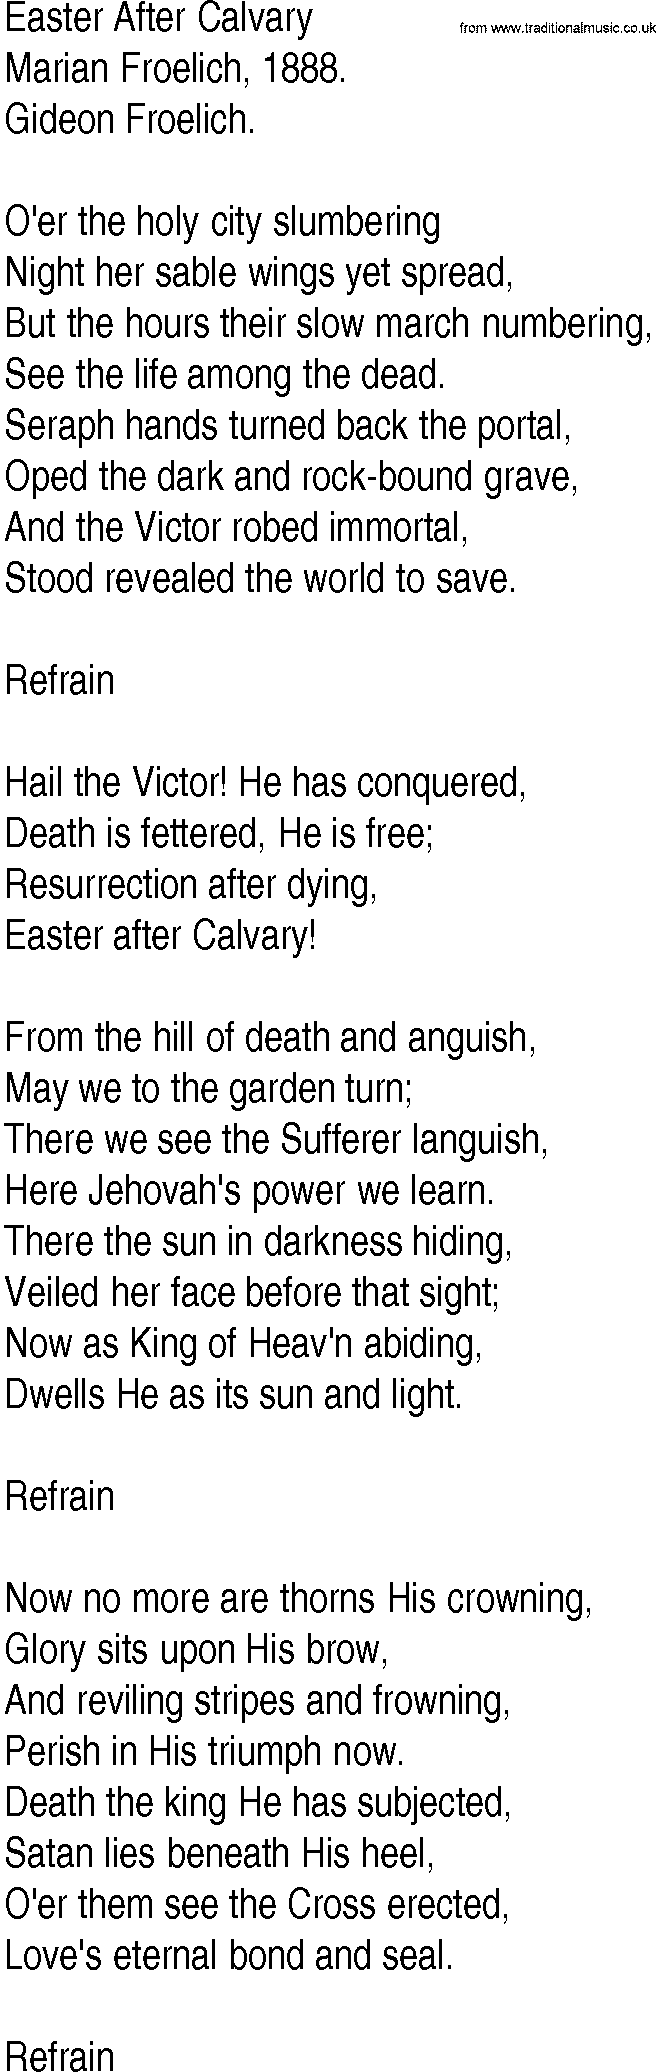 Hymn and Gospel Song: Easter After Calvary by Marian Froelich lyrics